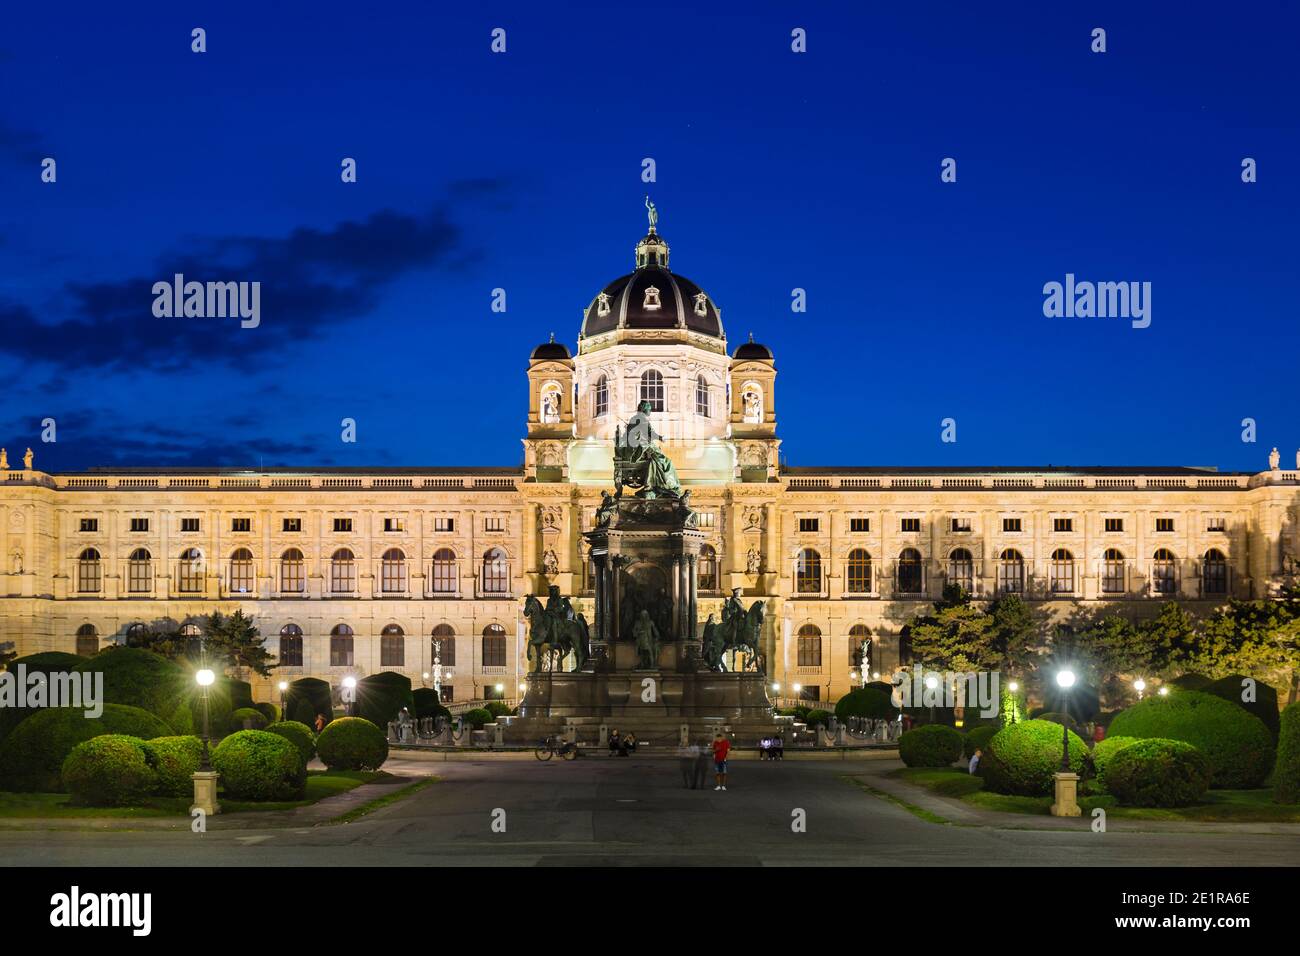 The Naturhistorisches Museum (Natural History Museum) in Vienna, Austria at night with the Maria Theresa statue in the foreground. Stock Photo